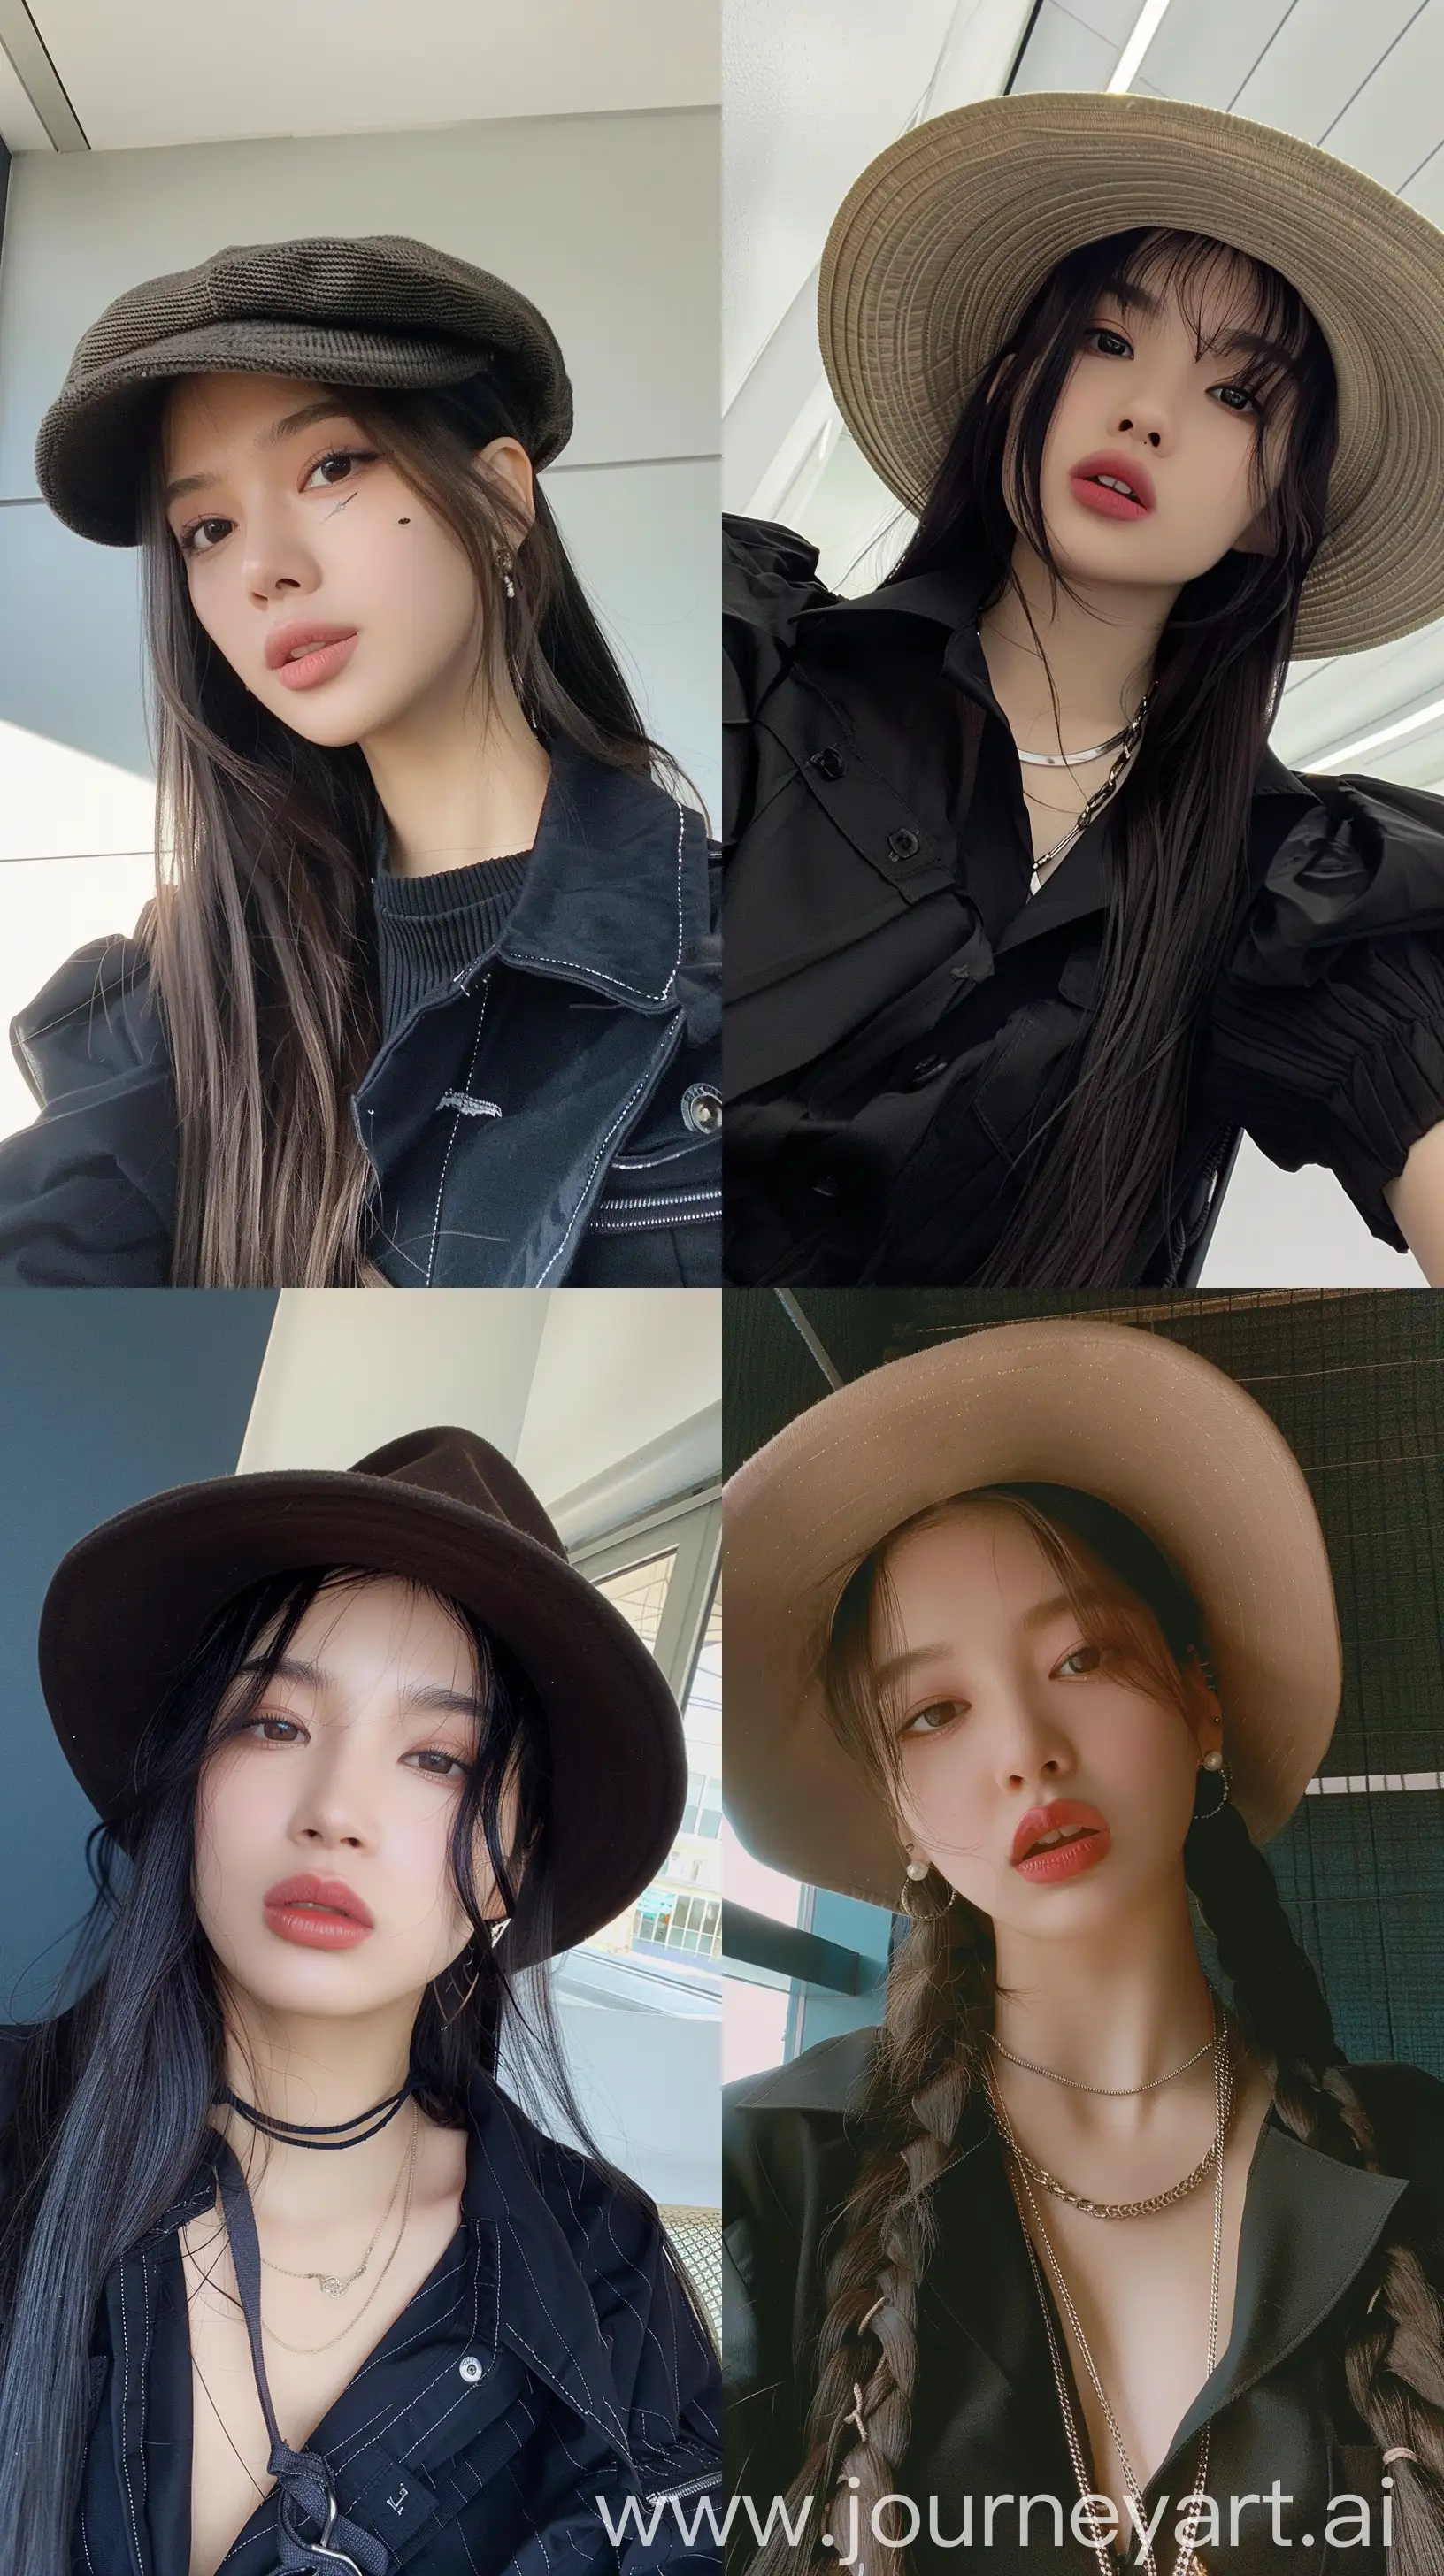 Blackpinks-Jennie-Selfie-in-Cute-Black-Outfit-with-Flat-Hat-and-Aesthetic-Makeup